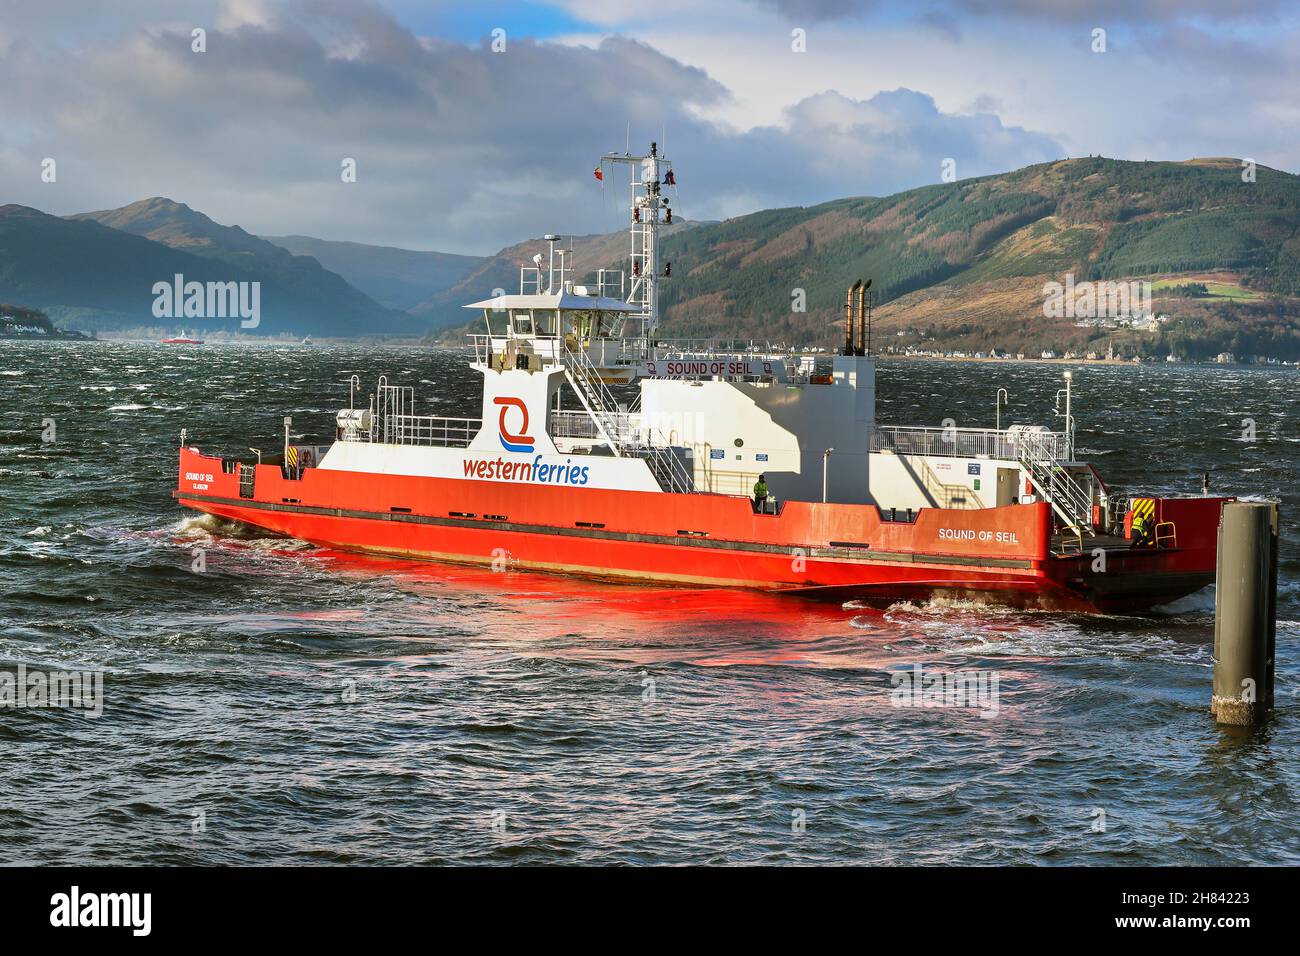 Western Ferries car ferry "Sound of Seil" travelling from Gourock to Dunoon on the Cowal peninsula across the Firth of Clyde, Scotland, UK Stock Photo